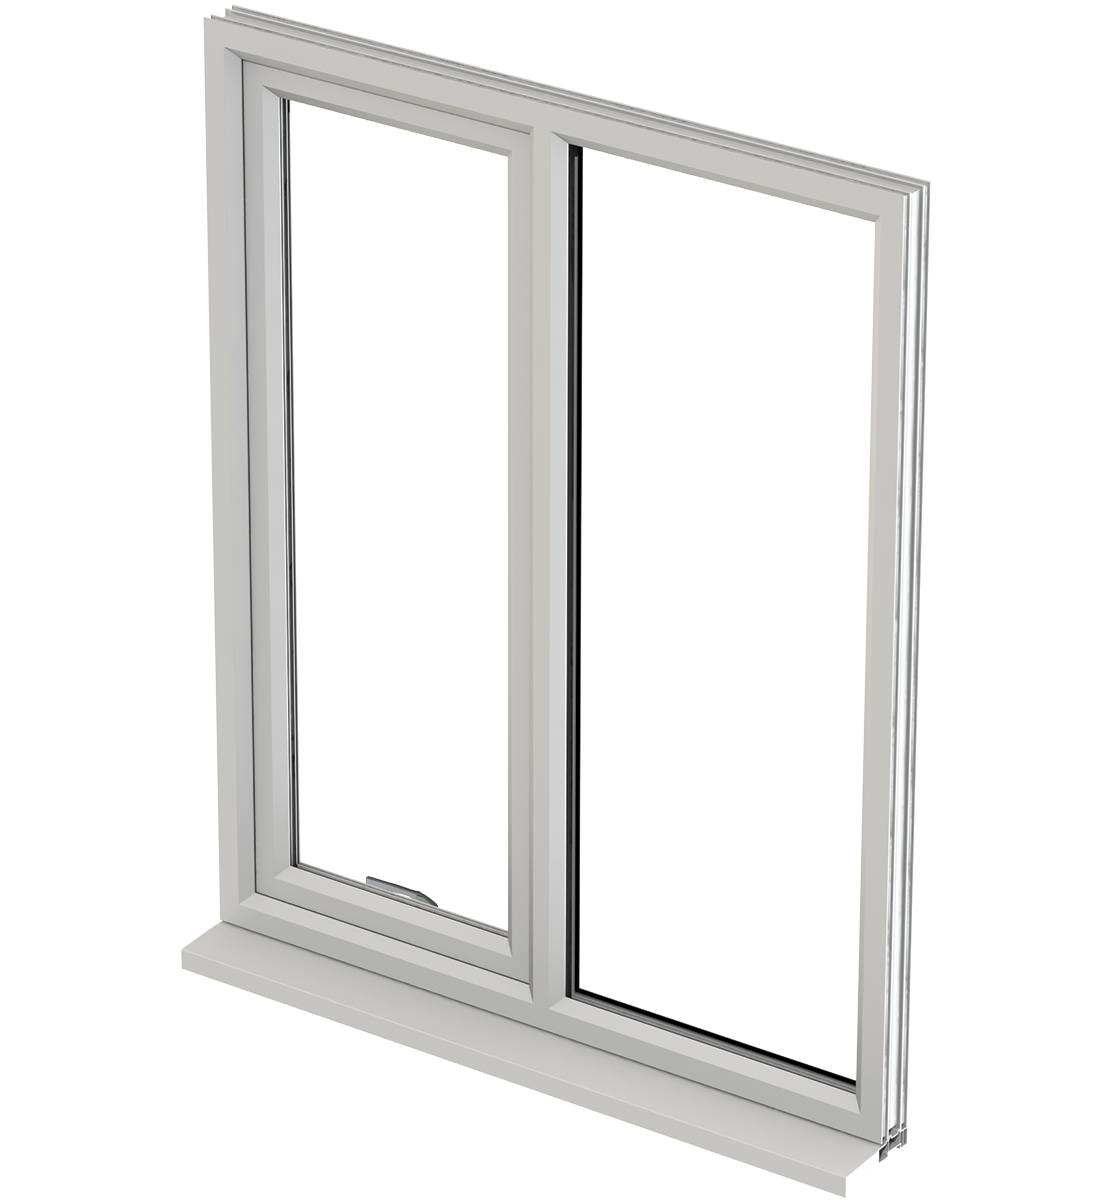 Photo of a tilt and turn window